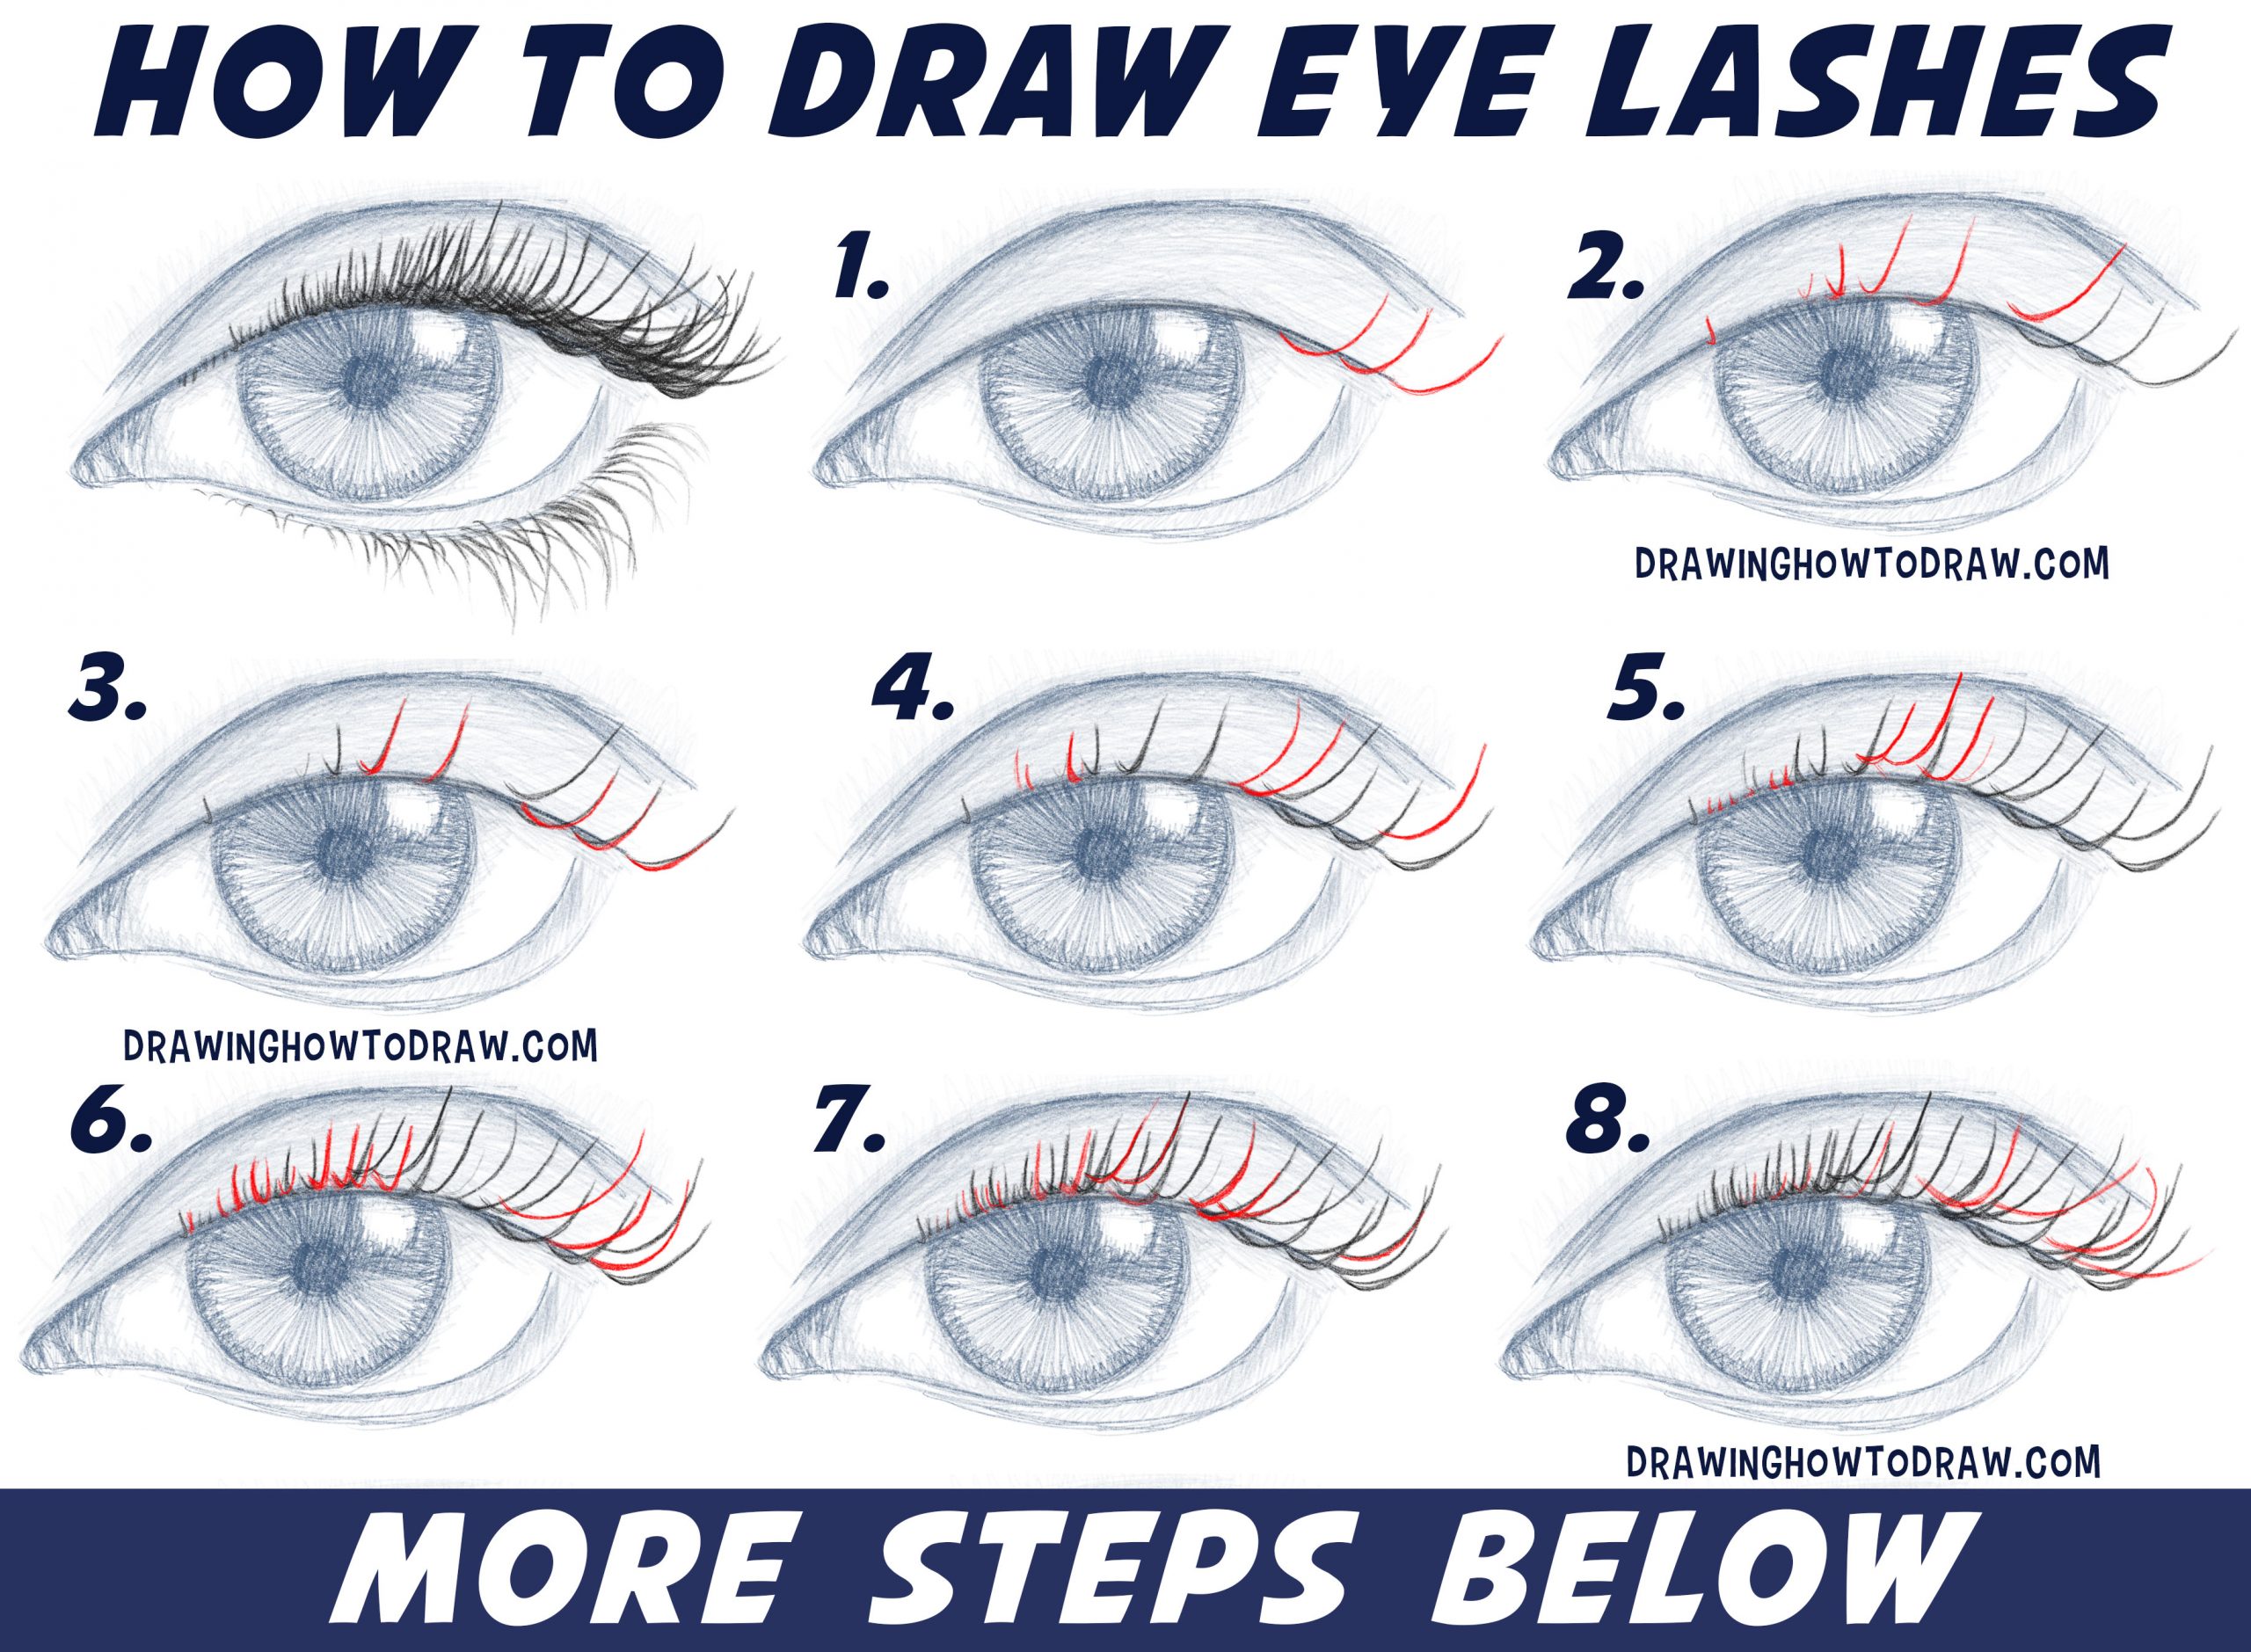 How to Draw Realistic Eyelashes?